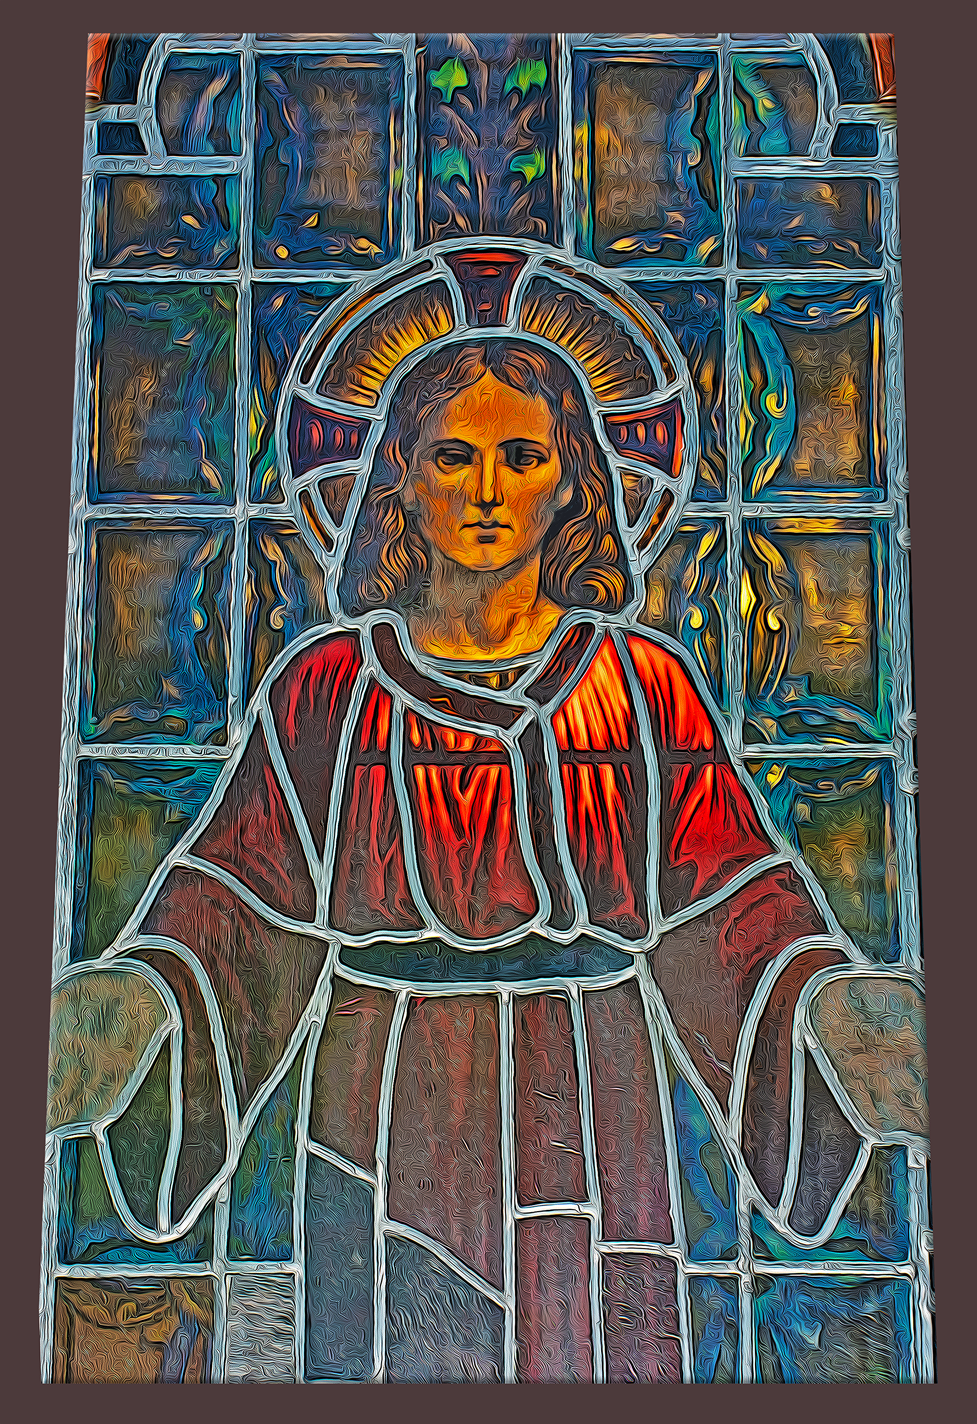 stained glass Jesus by Tiffany on the great welcome doorway at Holy Cross Catholic Church in Hell's Kitchen Manhattan New York City on 8 December 2016